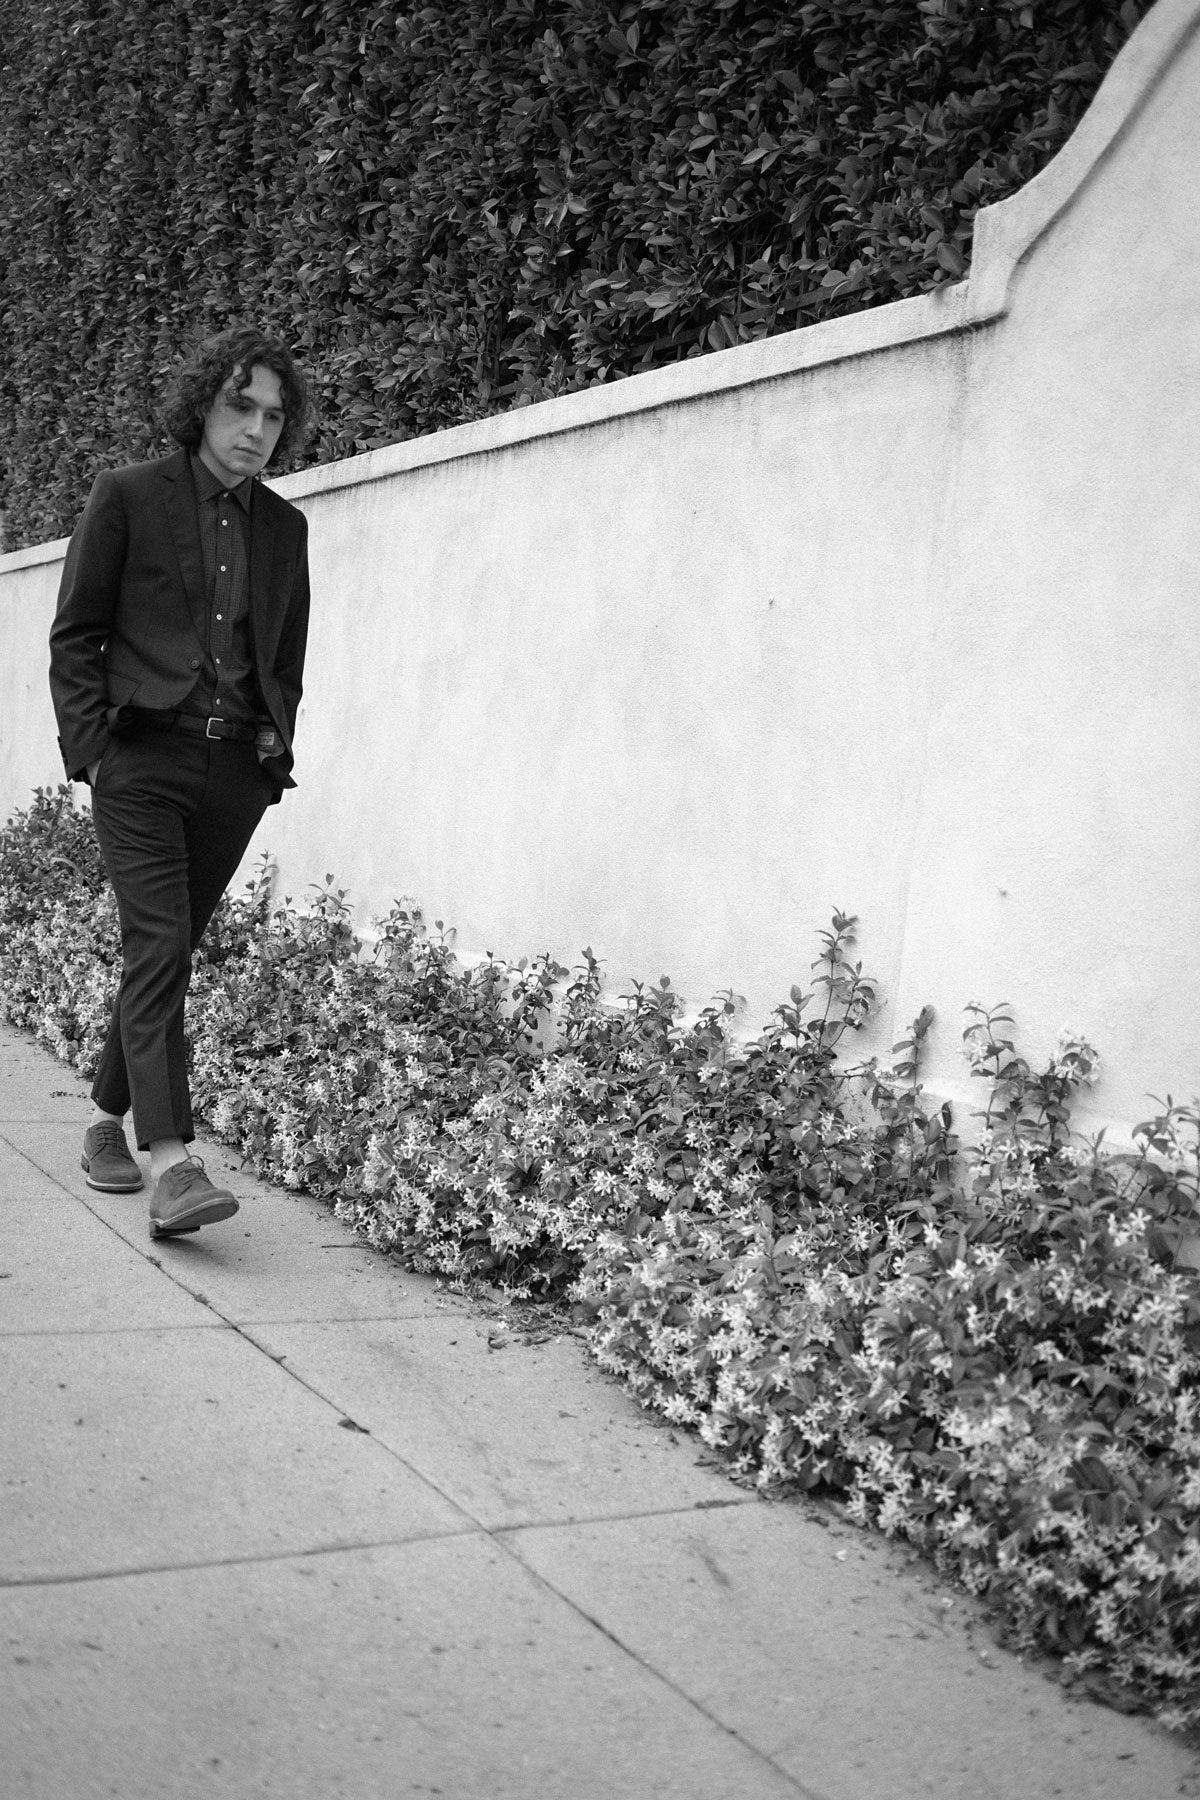 Black and white image of model walking in front of a wall, wearing a dark suit and button down shirt.